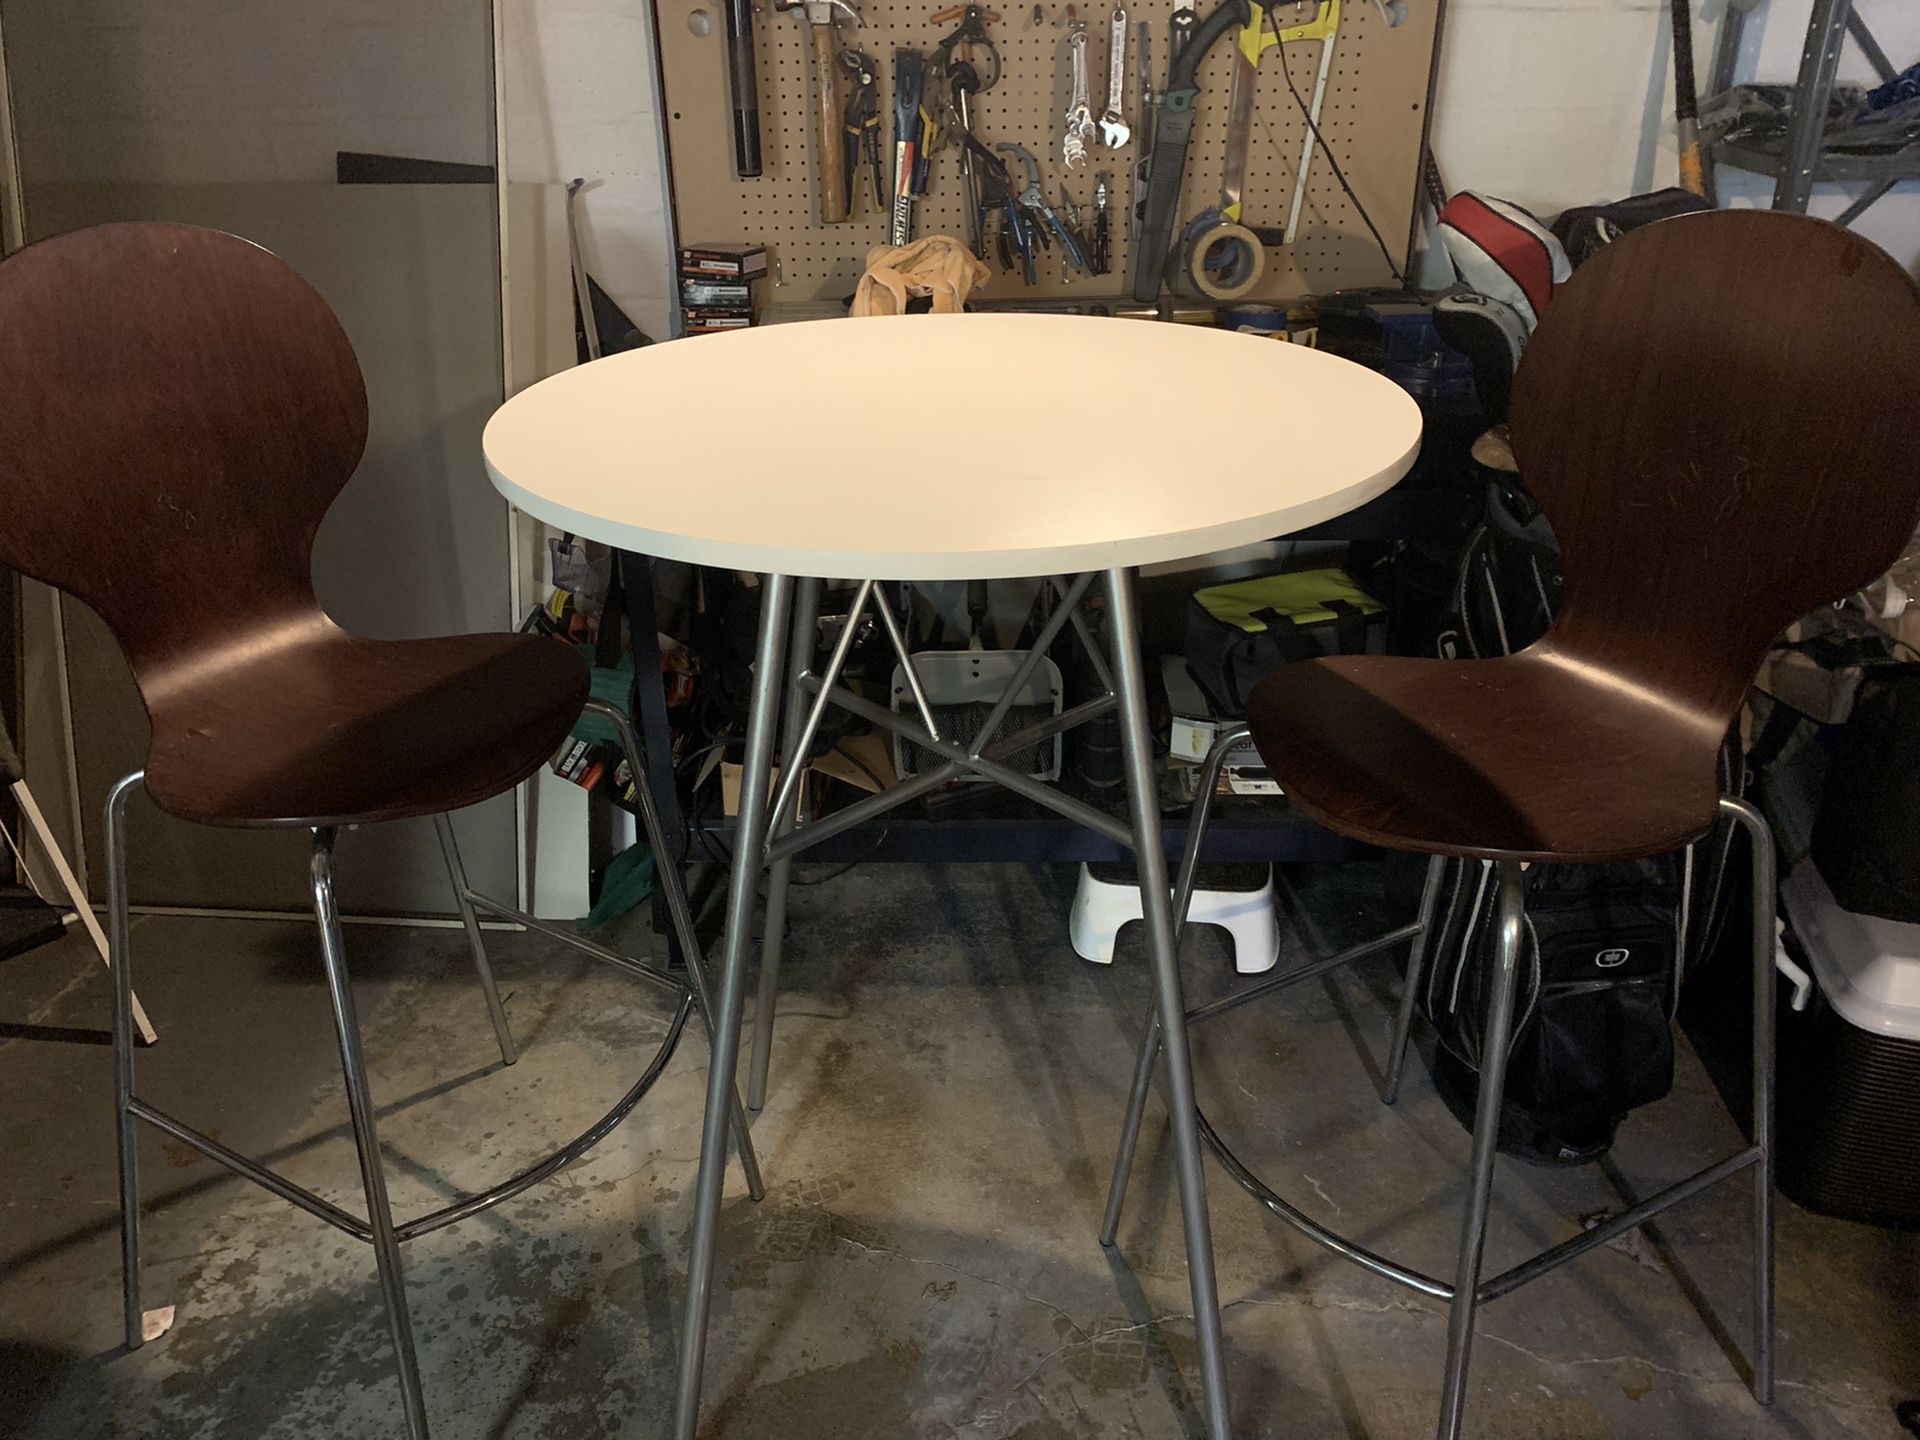 Crate and Barrel high table and chairs